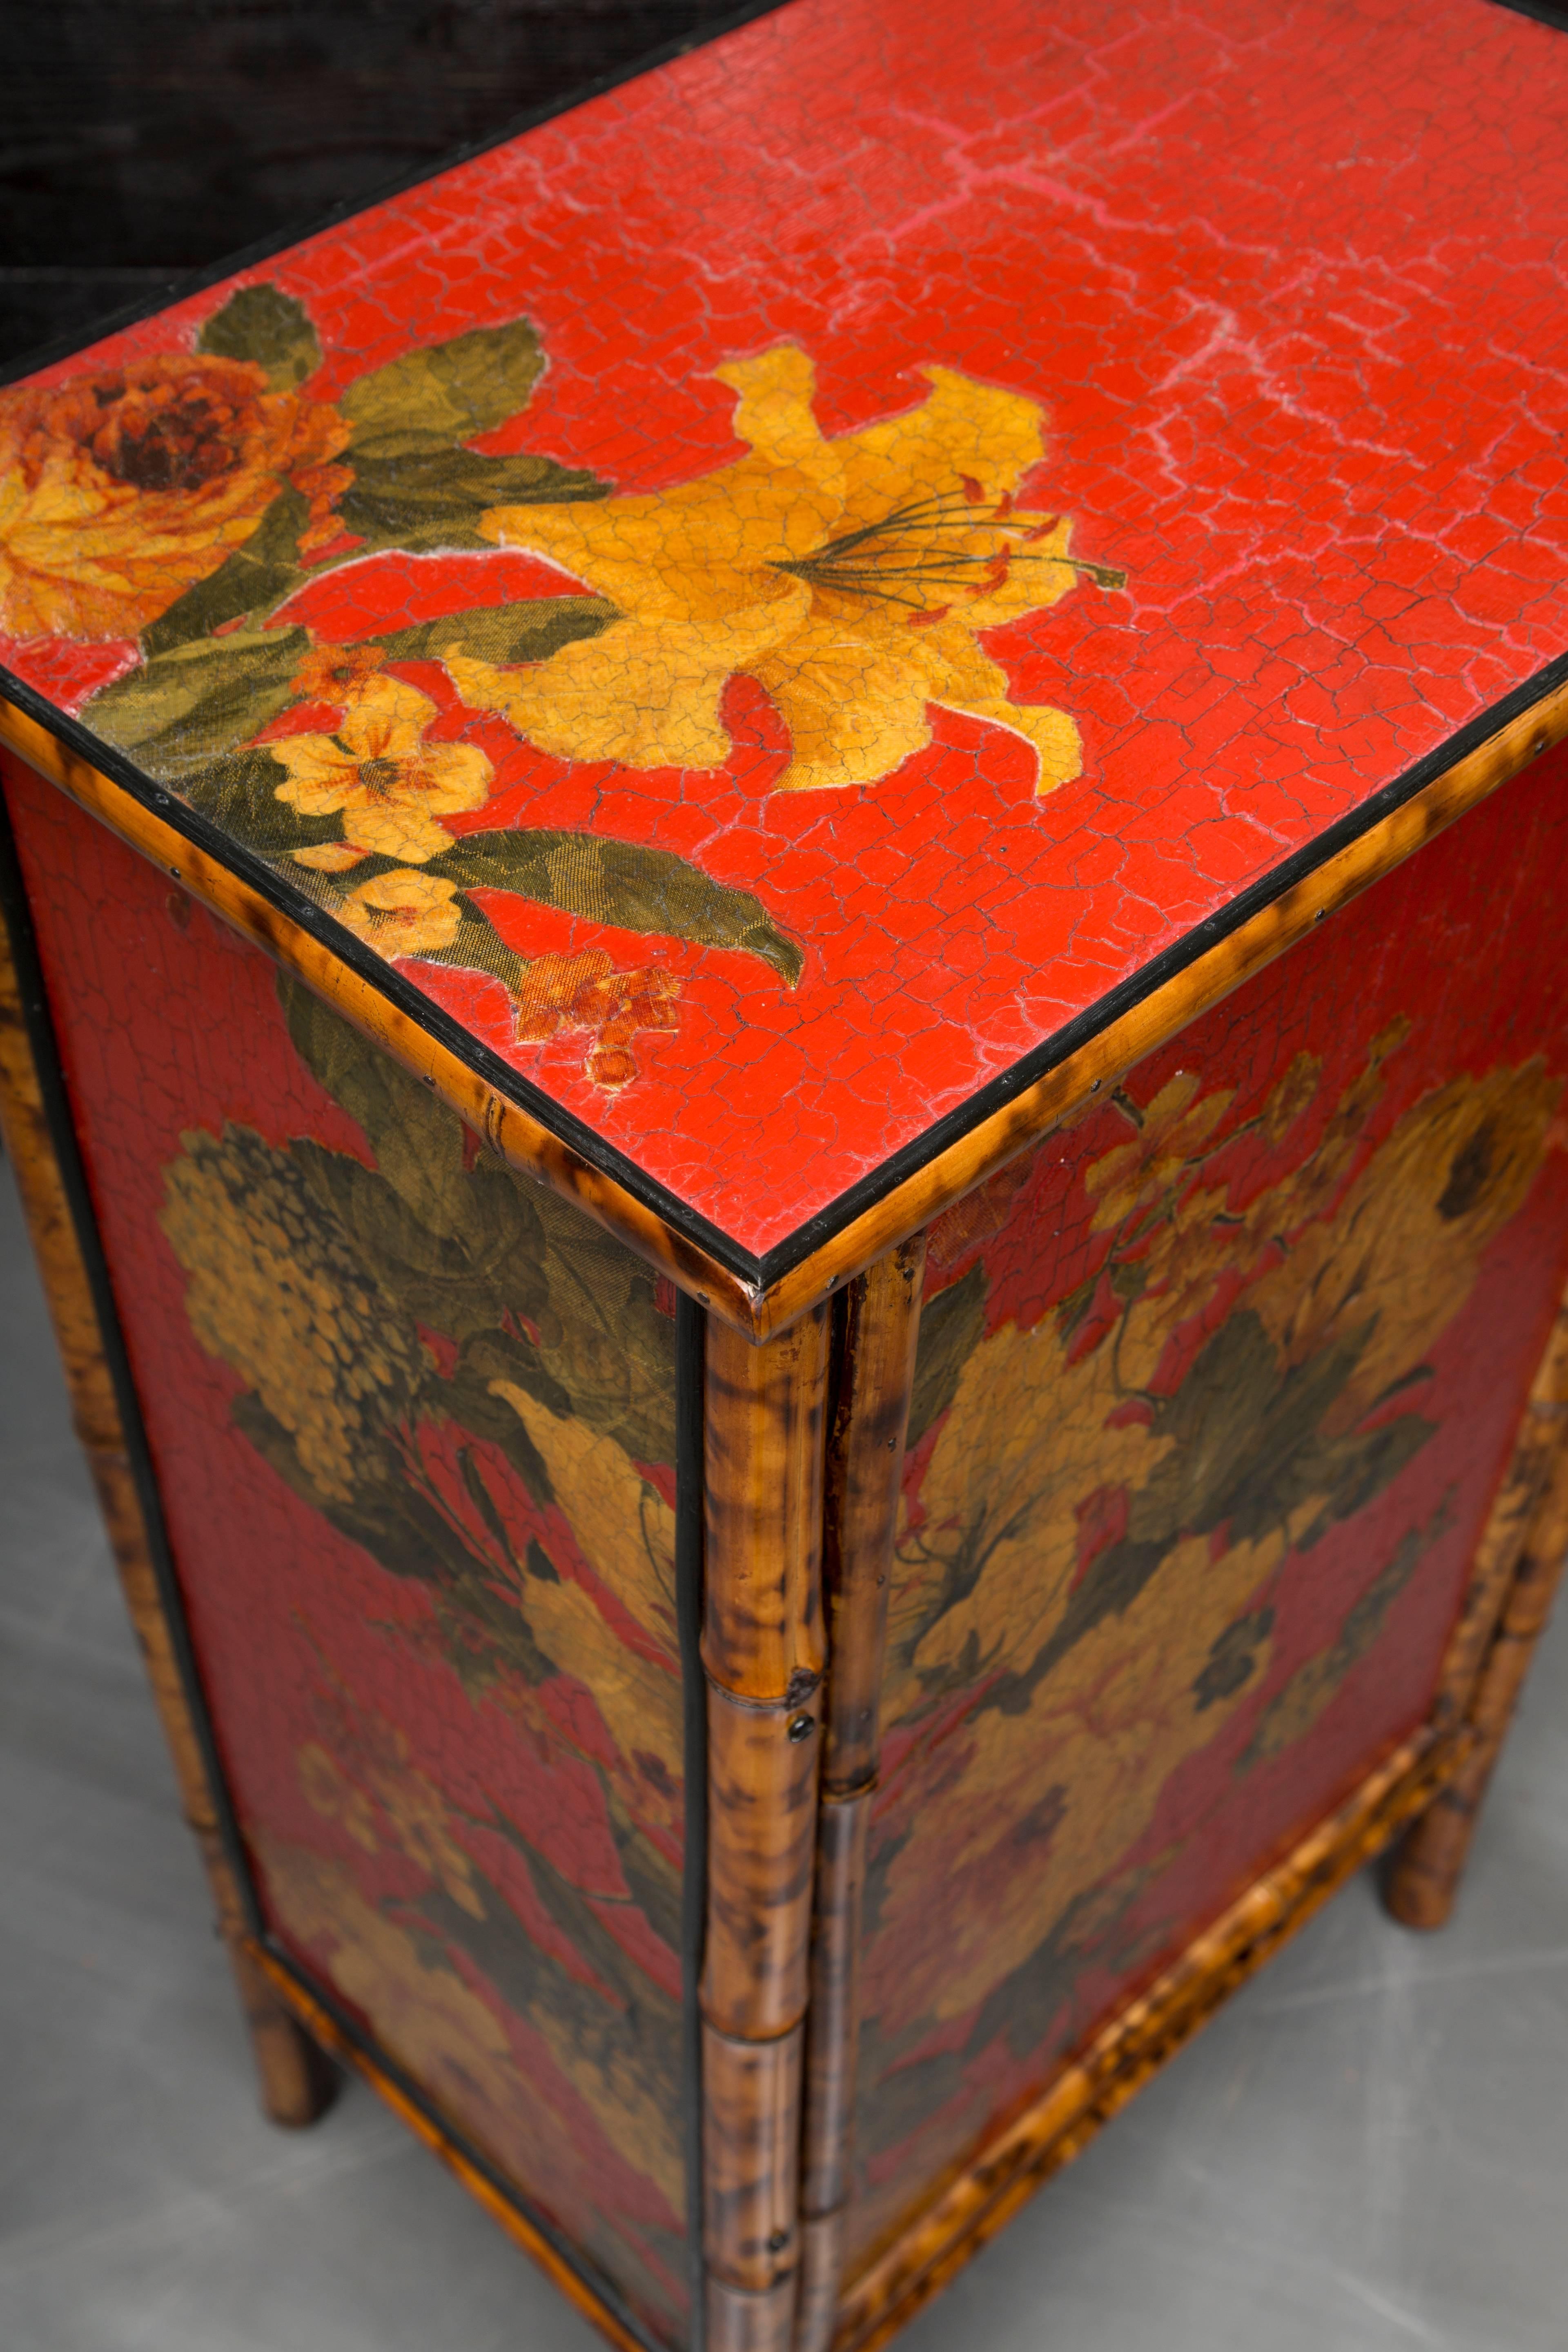 This decorative bamboo cabinet has a hand-painted yellow floral grouping on a red background with recurring images on the top and sides. The door opens to reveal interior shelving.